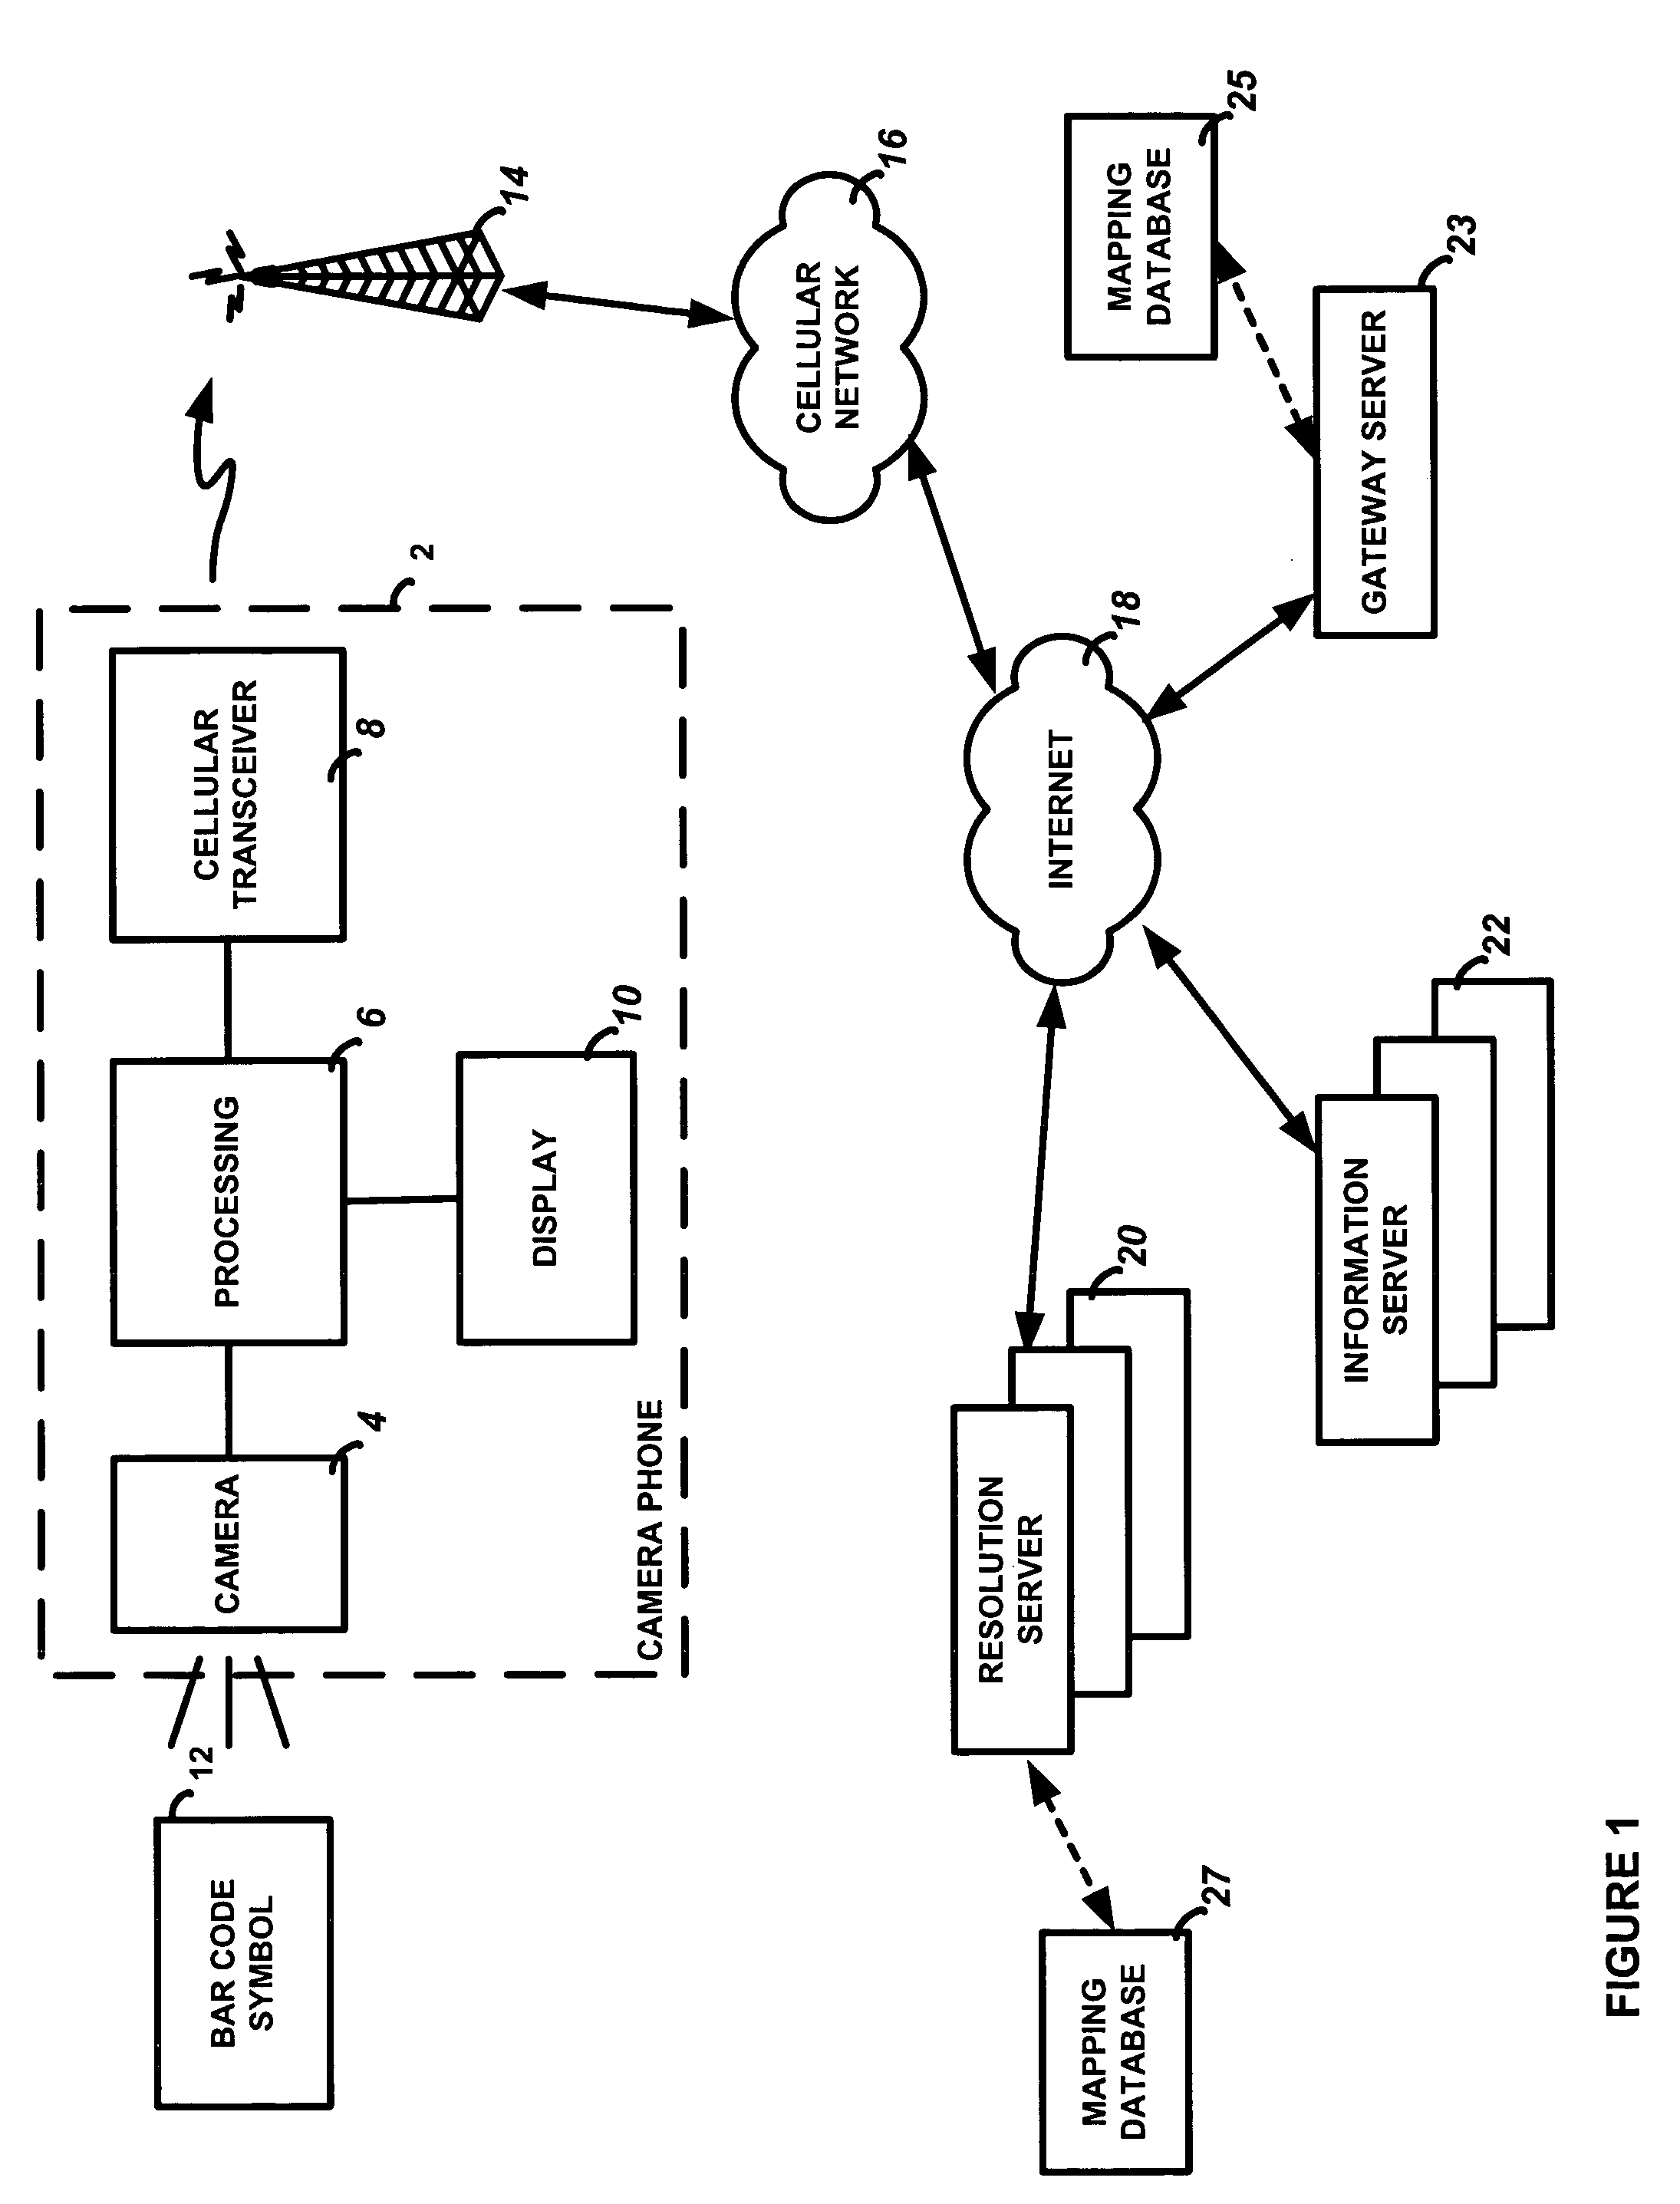 Automatic access of internet content with a camera-enabled cell phone